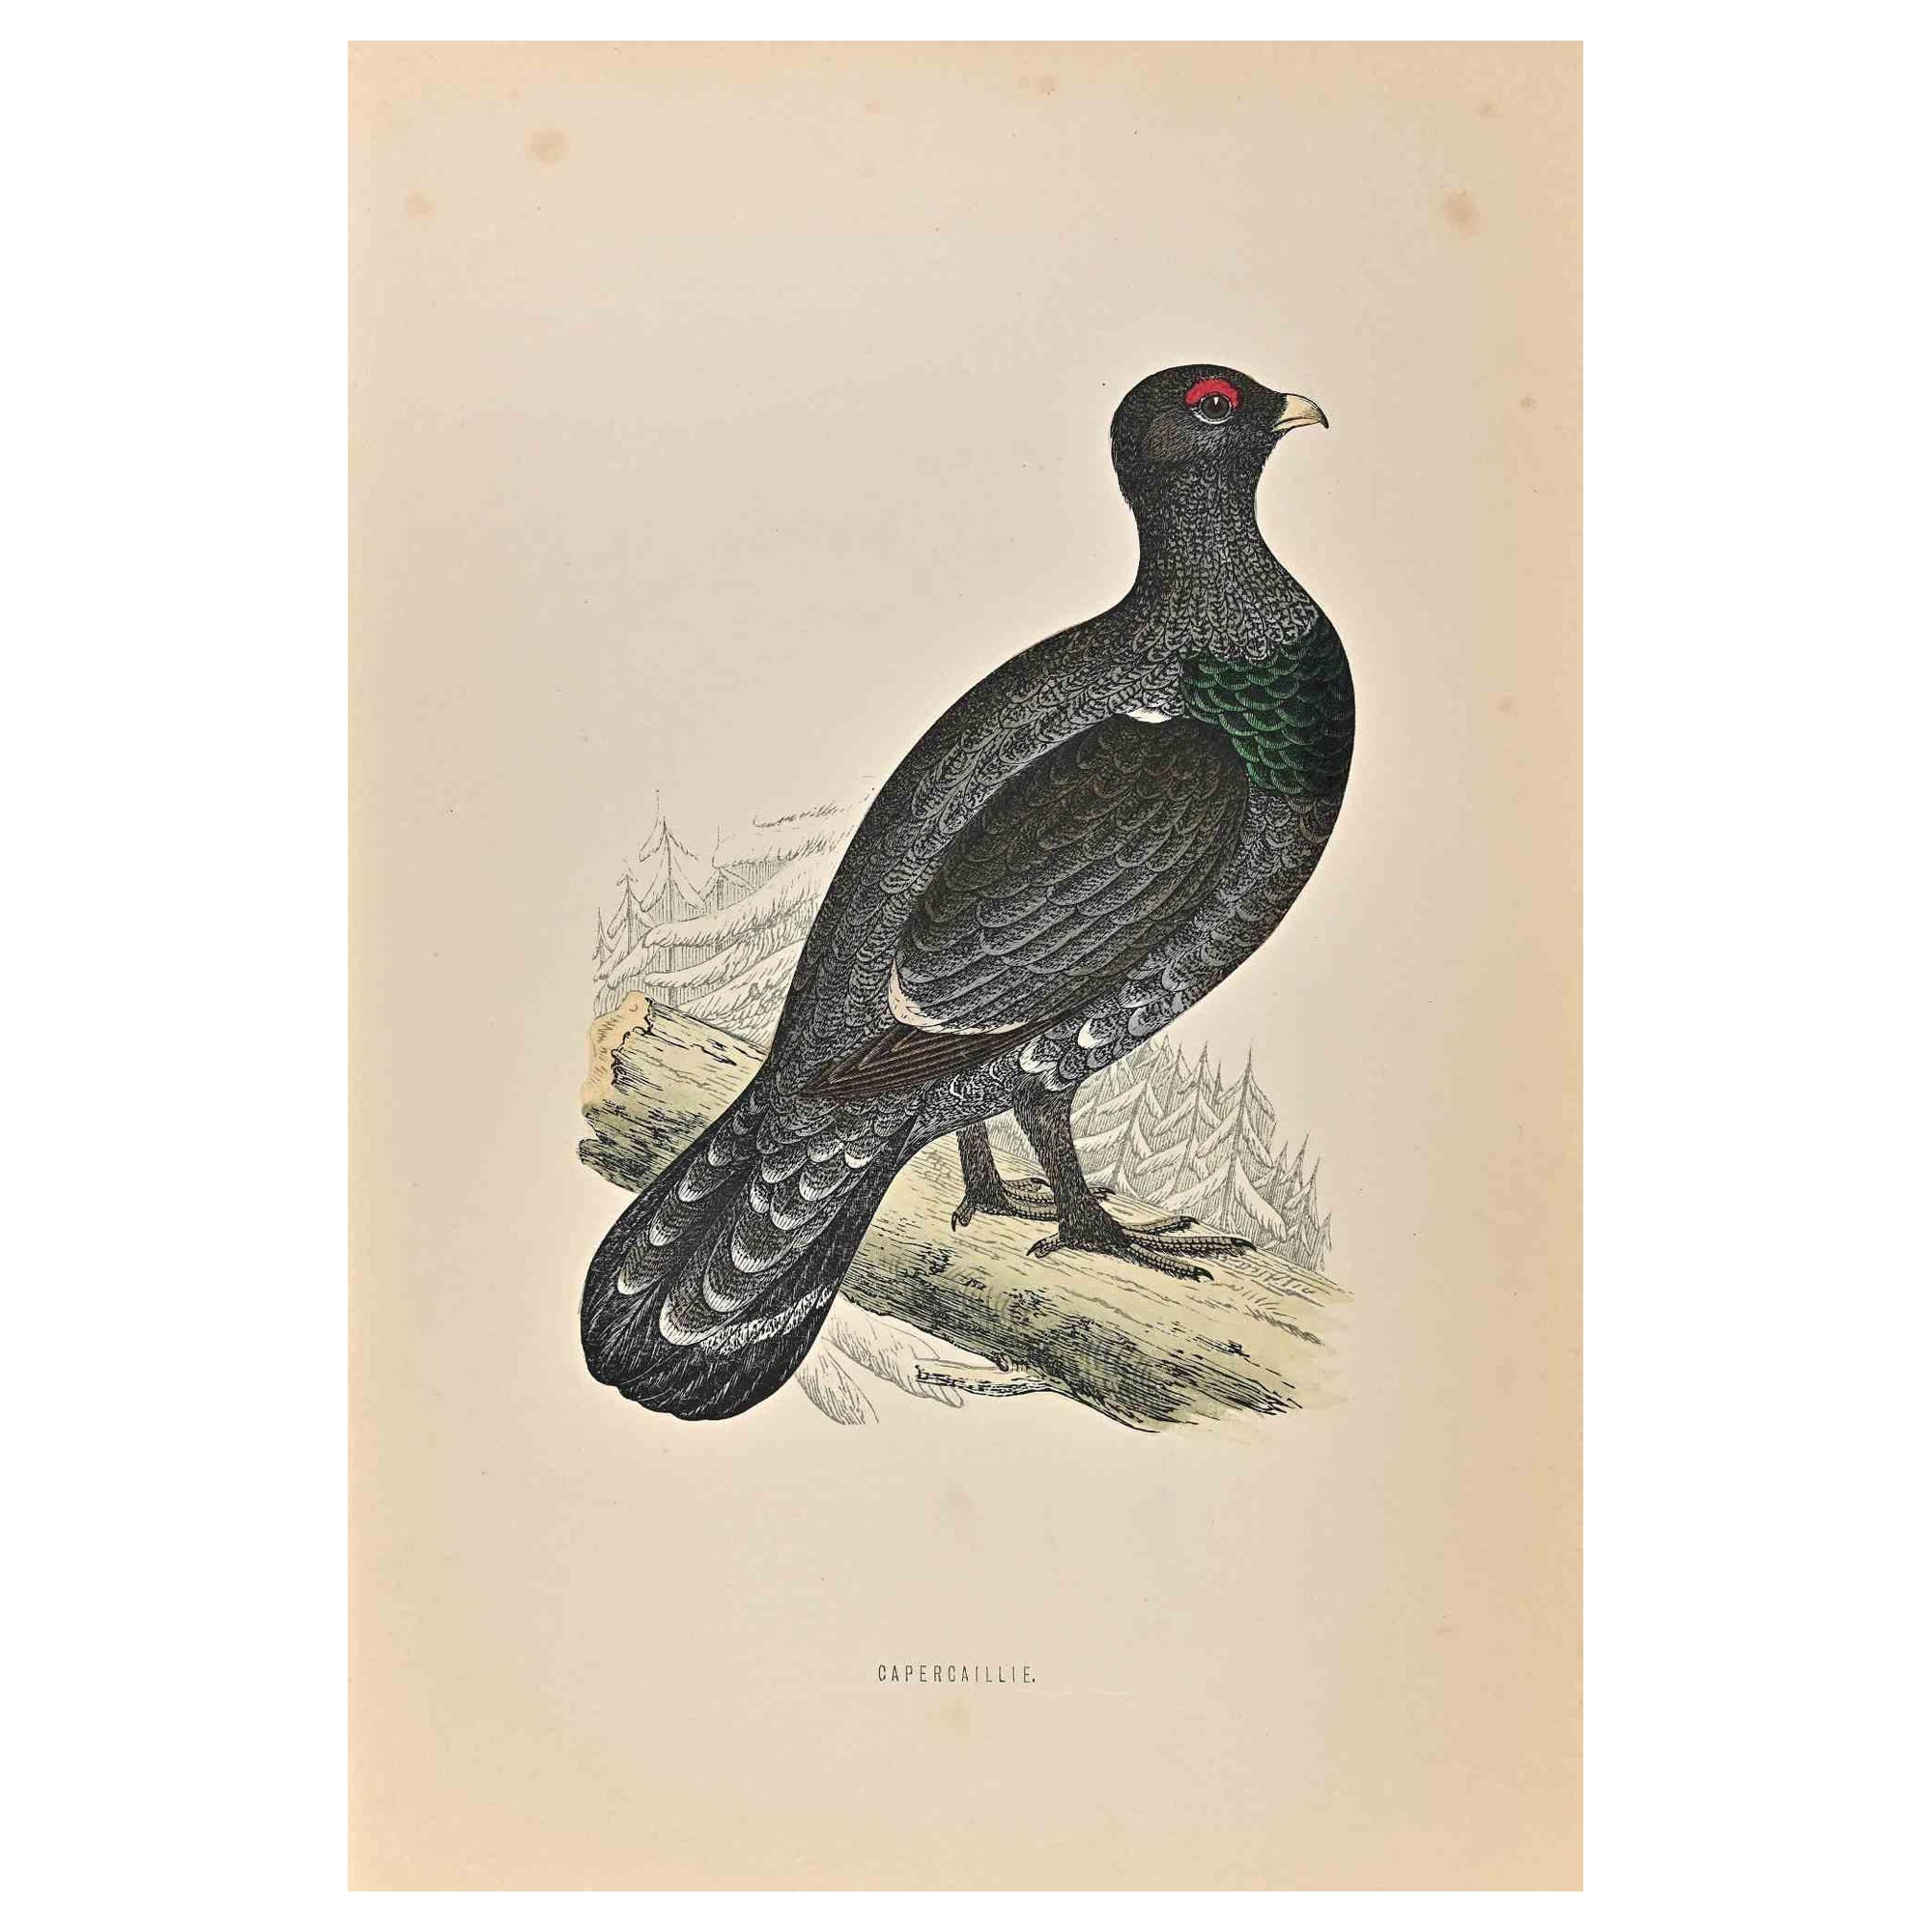 Capercaillie is a modern artwork realized in 1870 by the British artist Alexander Francis Lydon (1836-1917) . 

Woodcut print, hand colored, published by London, Bell & Sons, 1870.  Name of the bird printed in plate. This work is part of a print